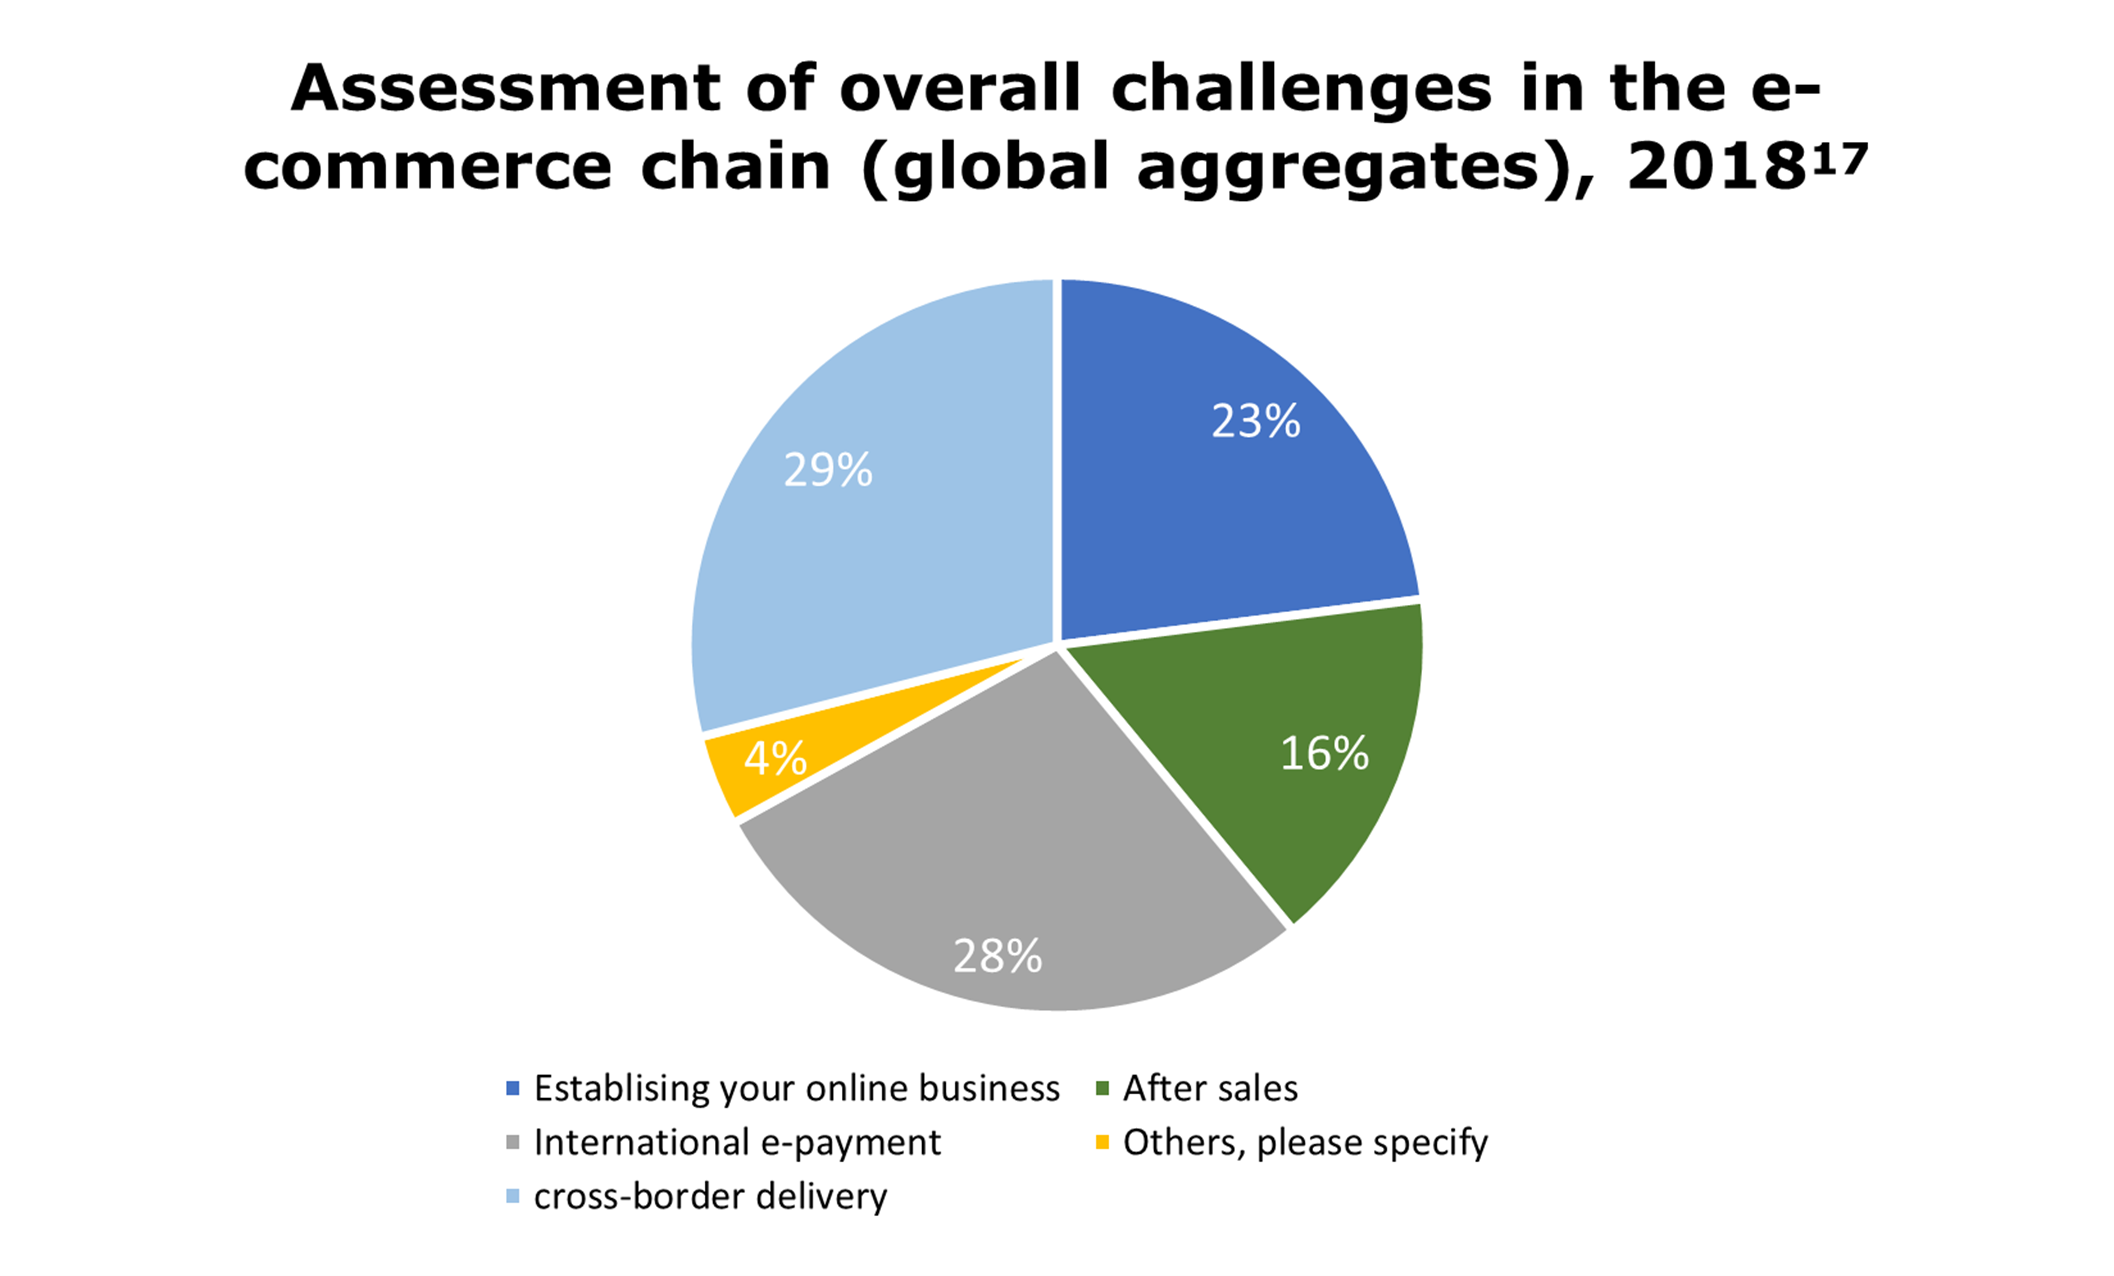 Assessment of overall challenges in the e-commer chain